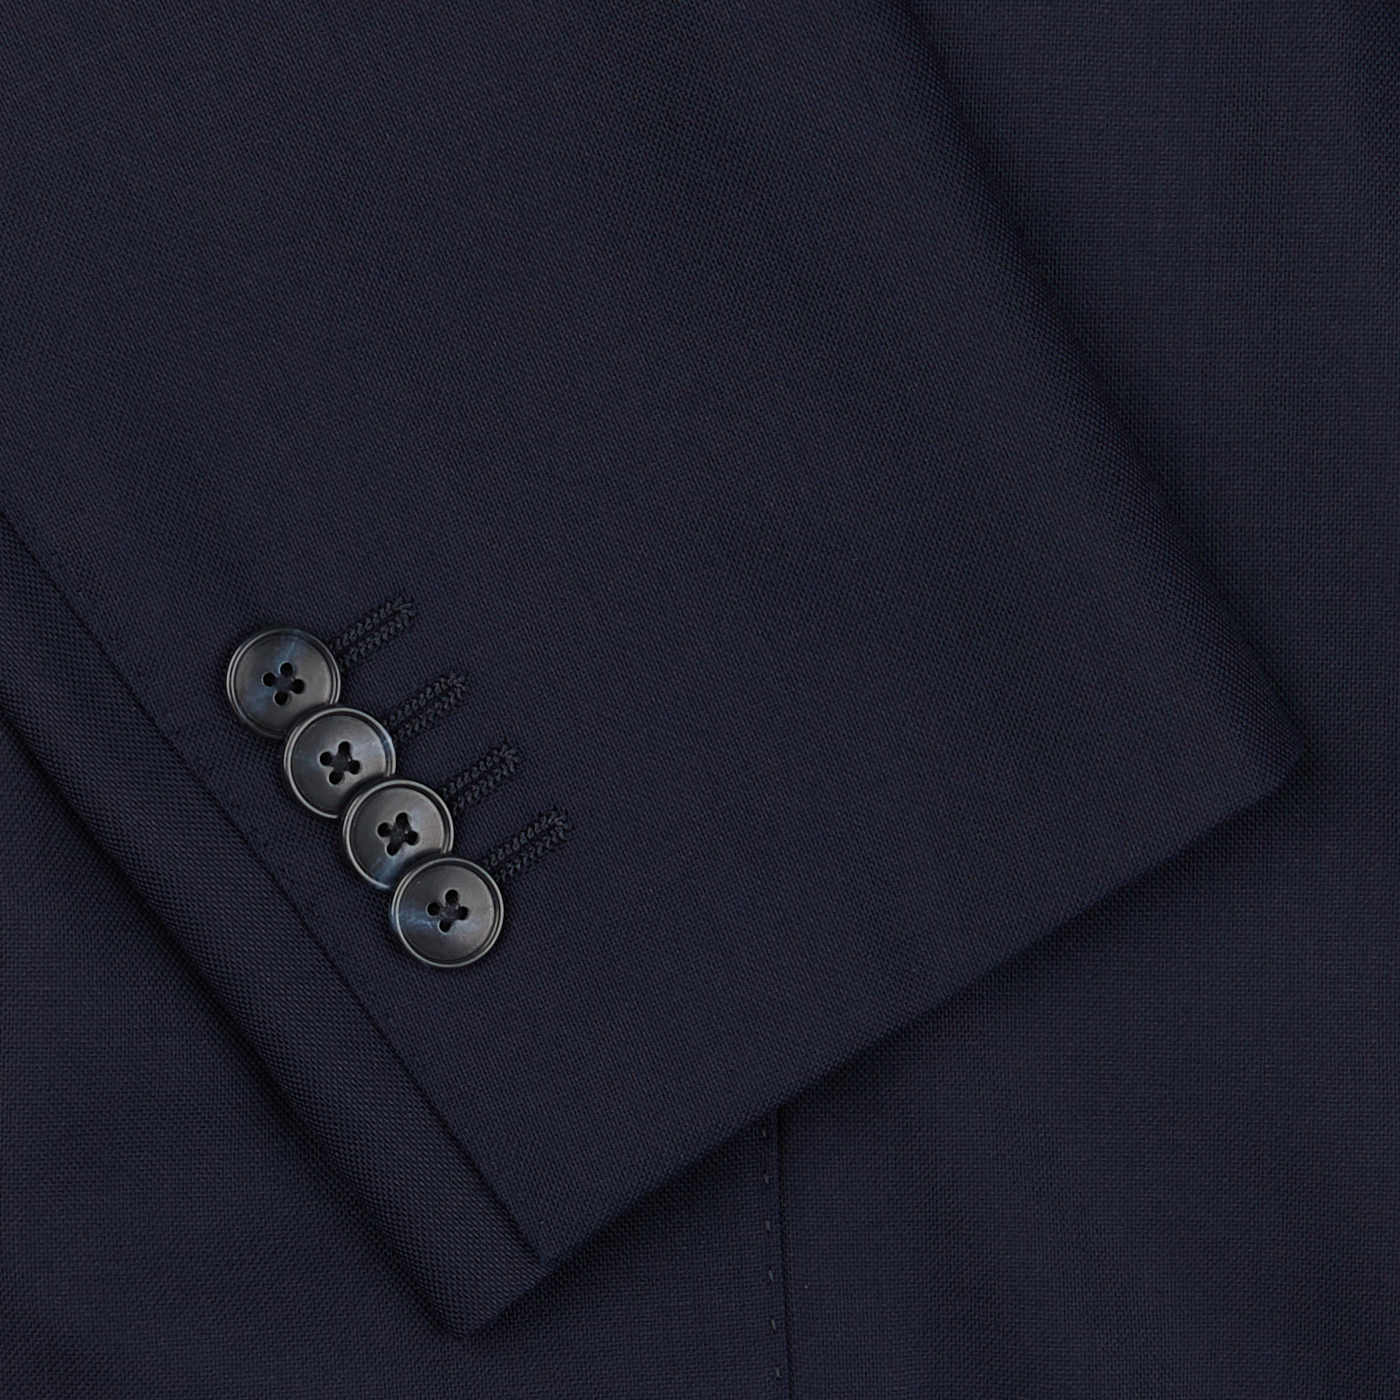 Close-up of a Baltzar Sartorial navy Super 100's wool suit jacket sleeve, featuring a row of four dark buttons.